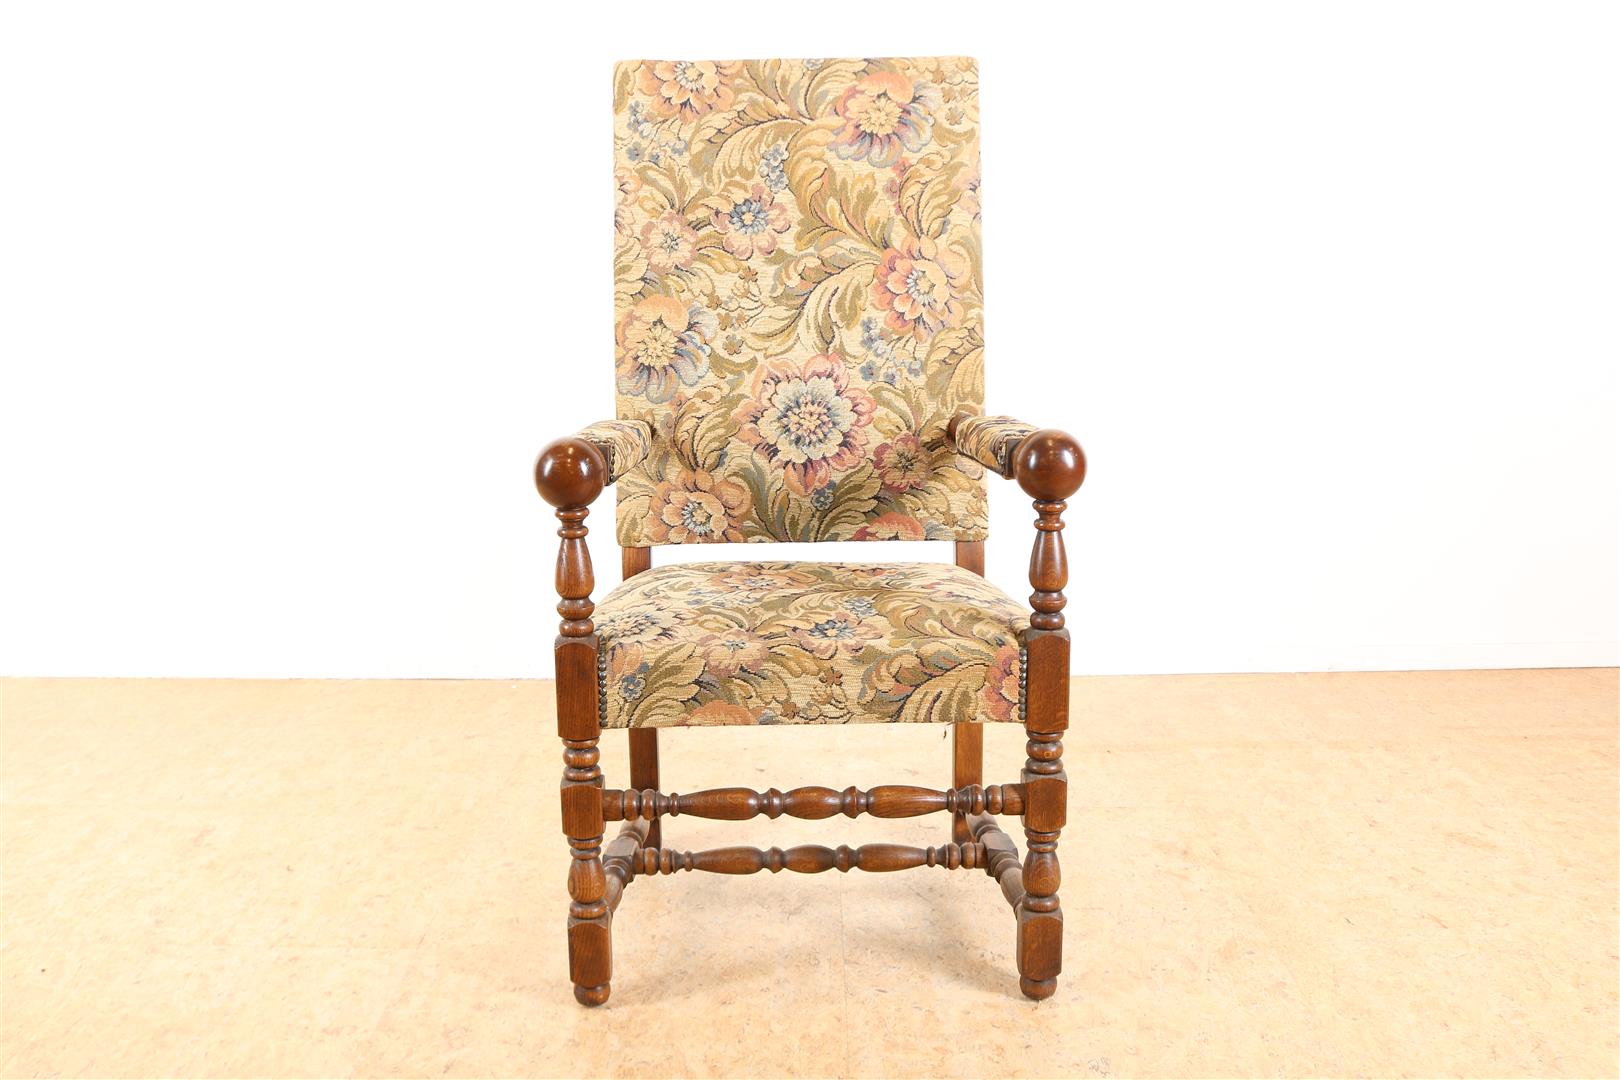 Oak Renaissance style armchair with embroidered upholstery.